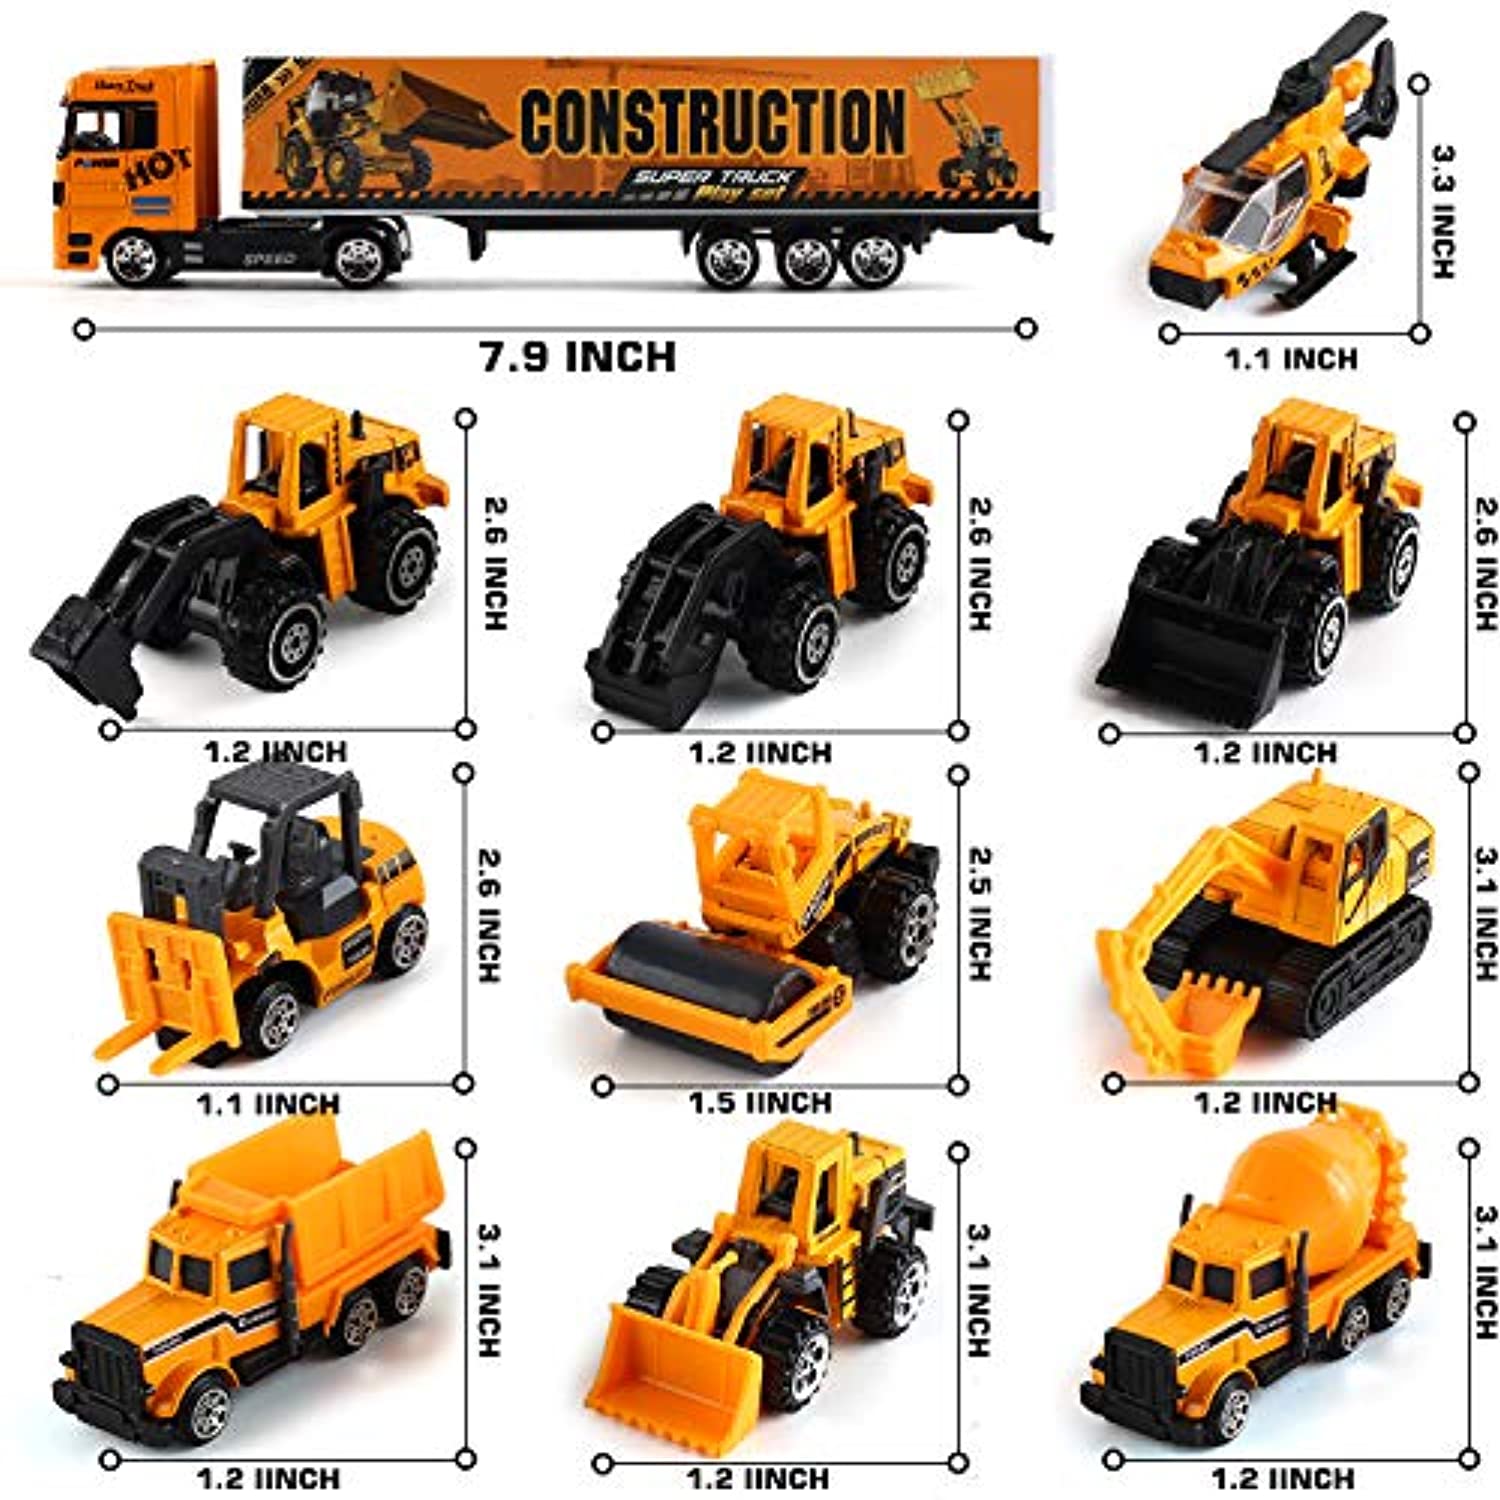 19 in 1 Construction Truck with Engineering Worker Toy Set, Mini Die-Cast Engine Car in Carrier Truck, Double Side Transport Vehicle Play for Child Kid Boy Girl Birthday Christmas Party Favors - image 3 of 7